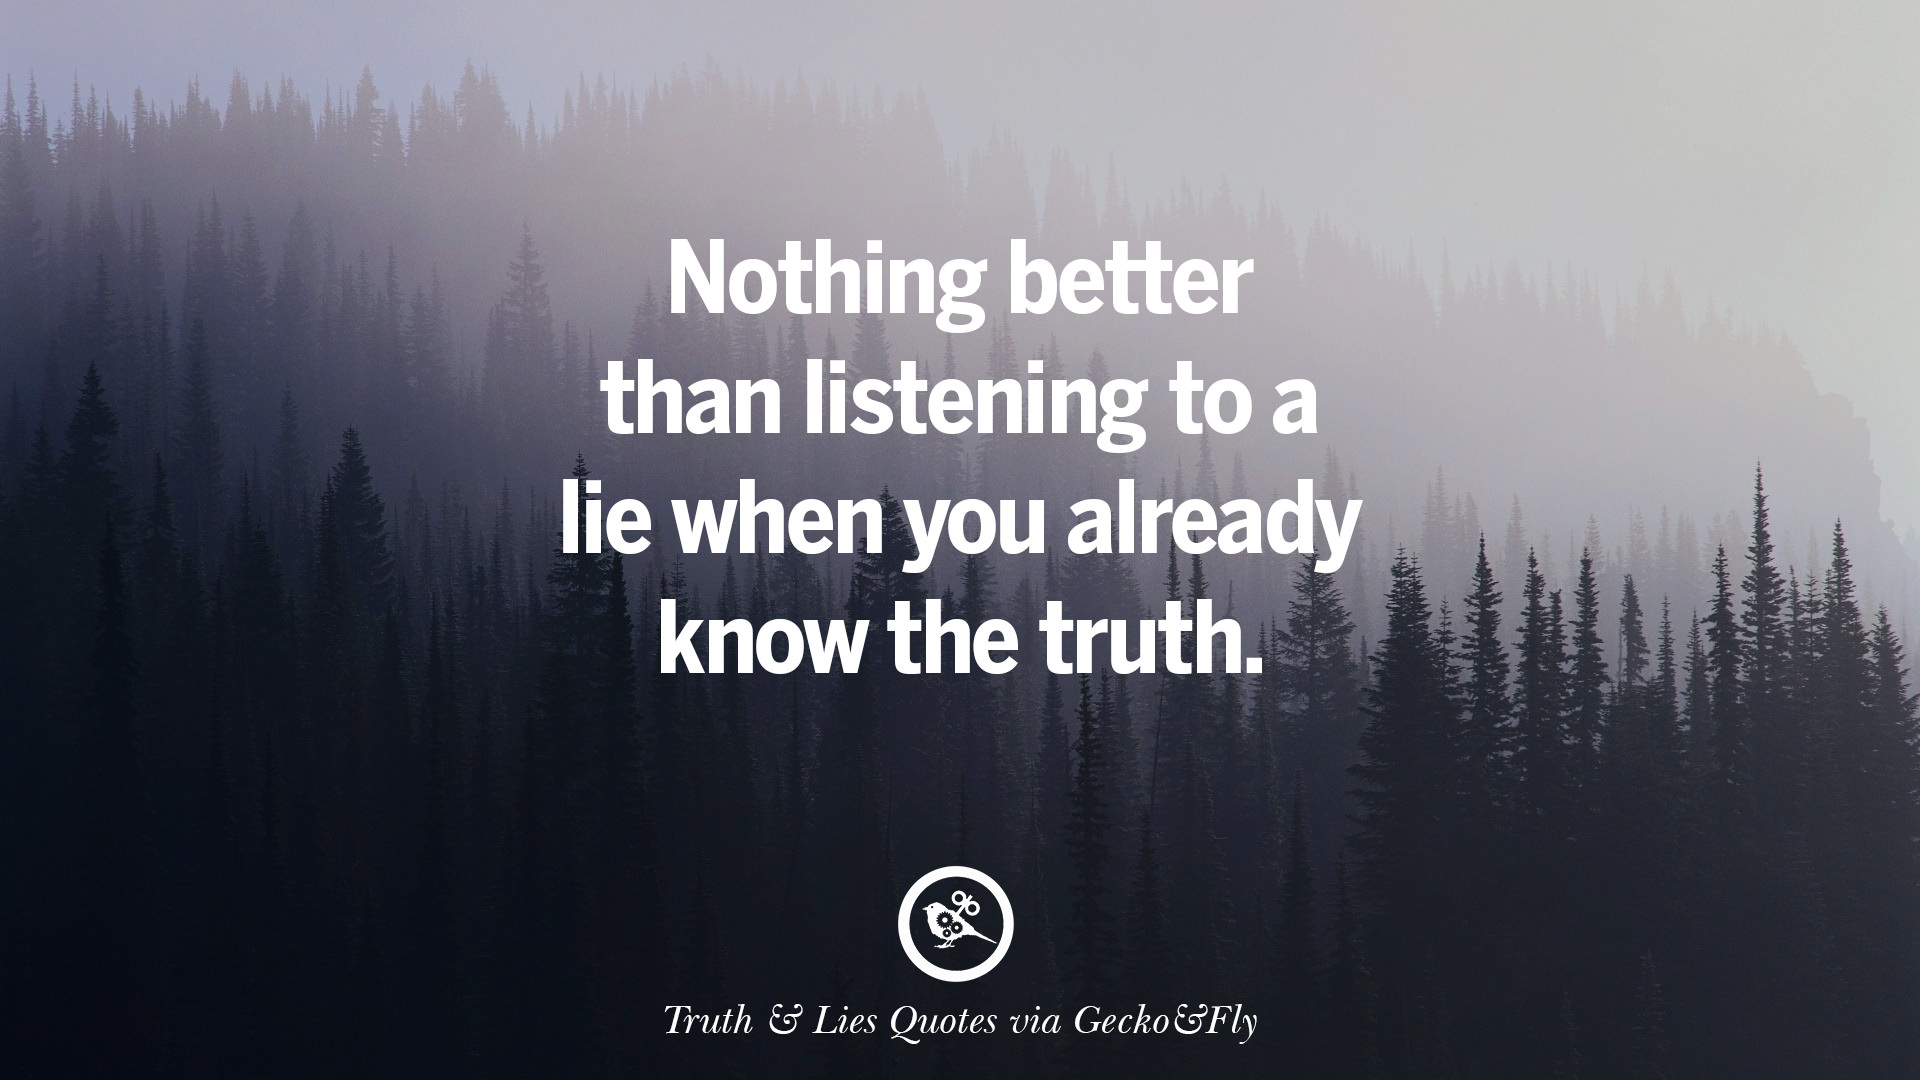 Nothing better than listening to a lie when you already know the truth. 